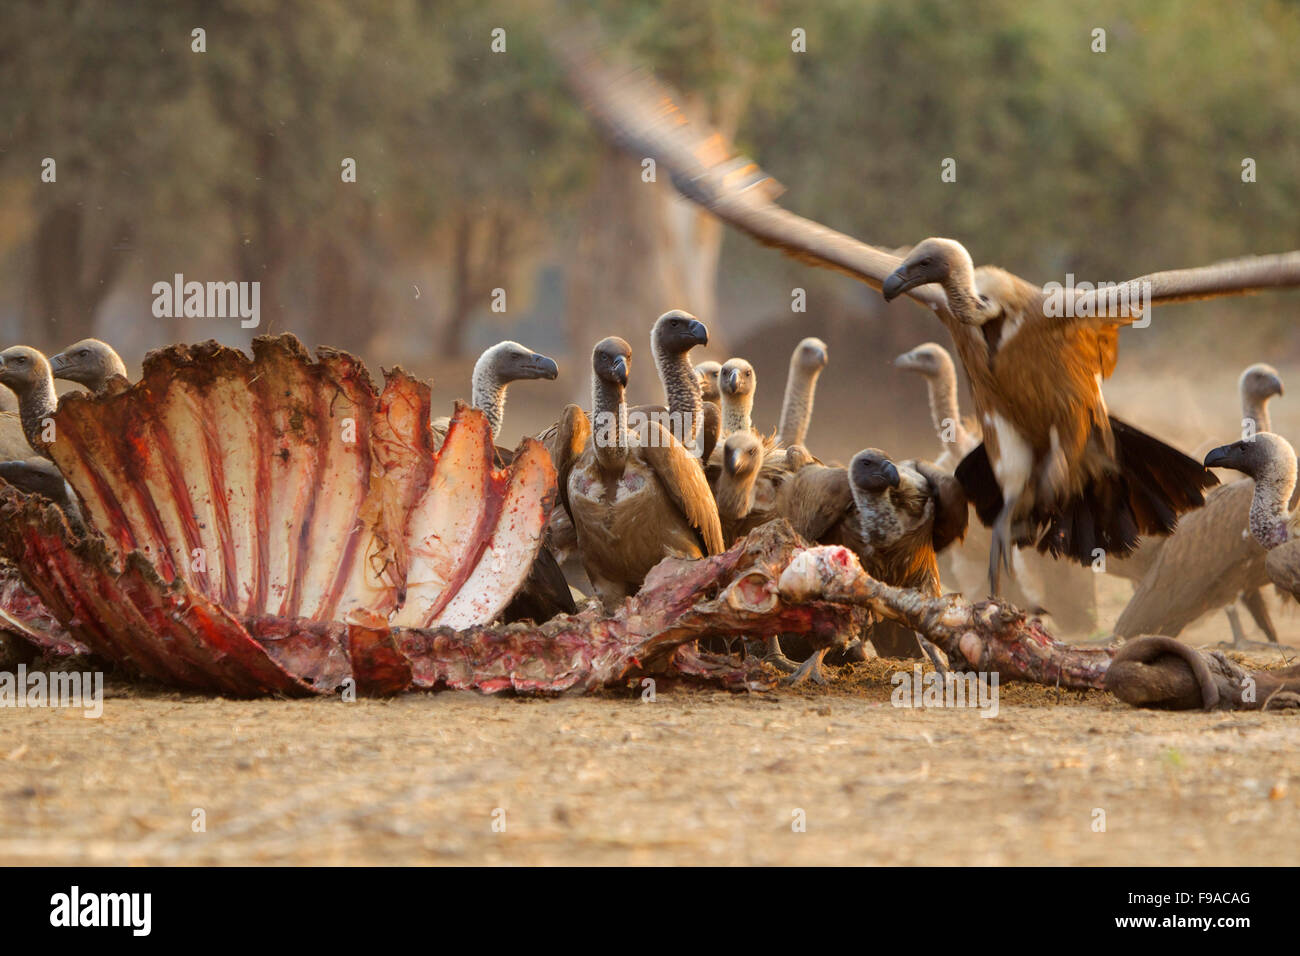 White backed vultures feasting on a remains of a carcass, Mana Pool, Zimbabwe Stock Photo